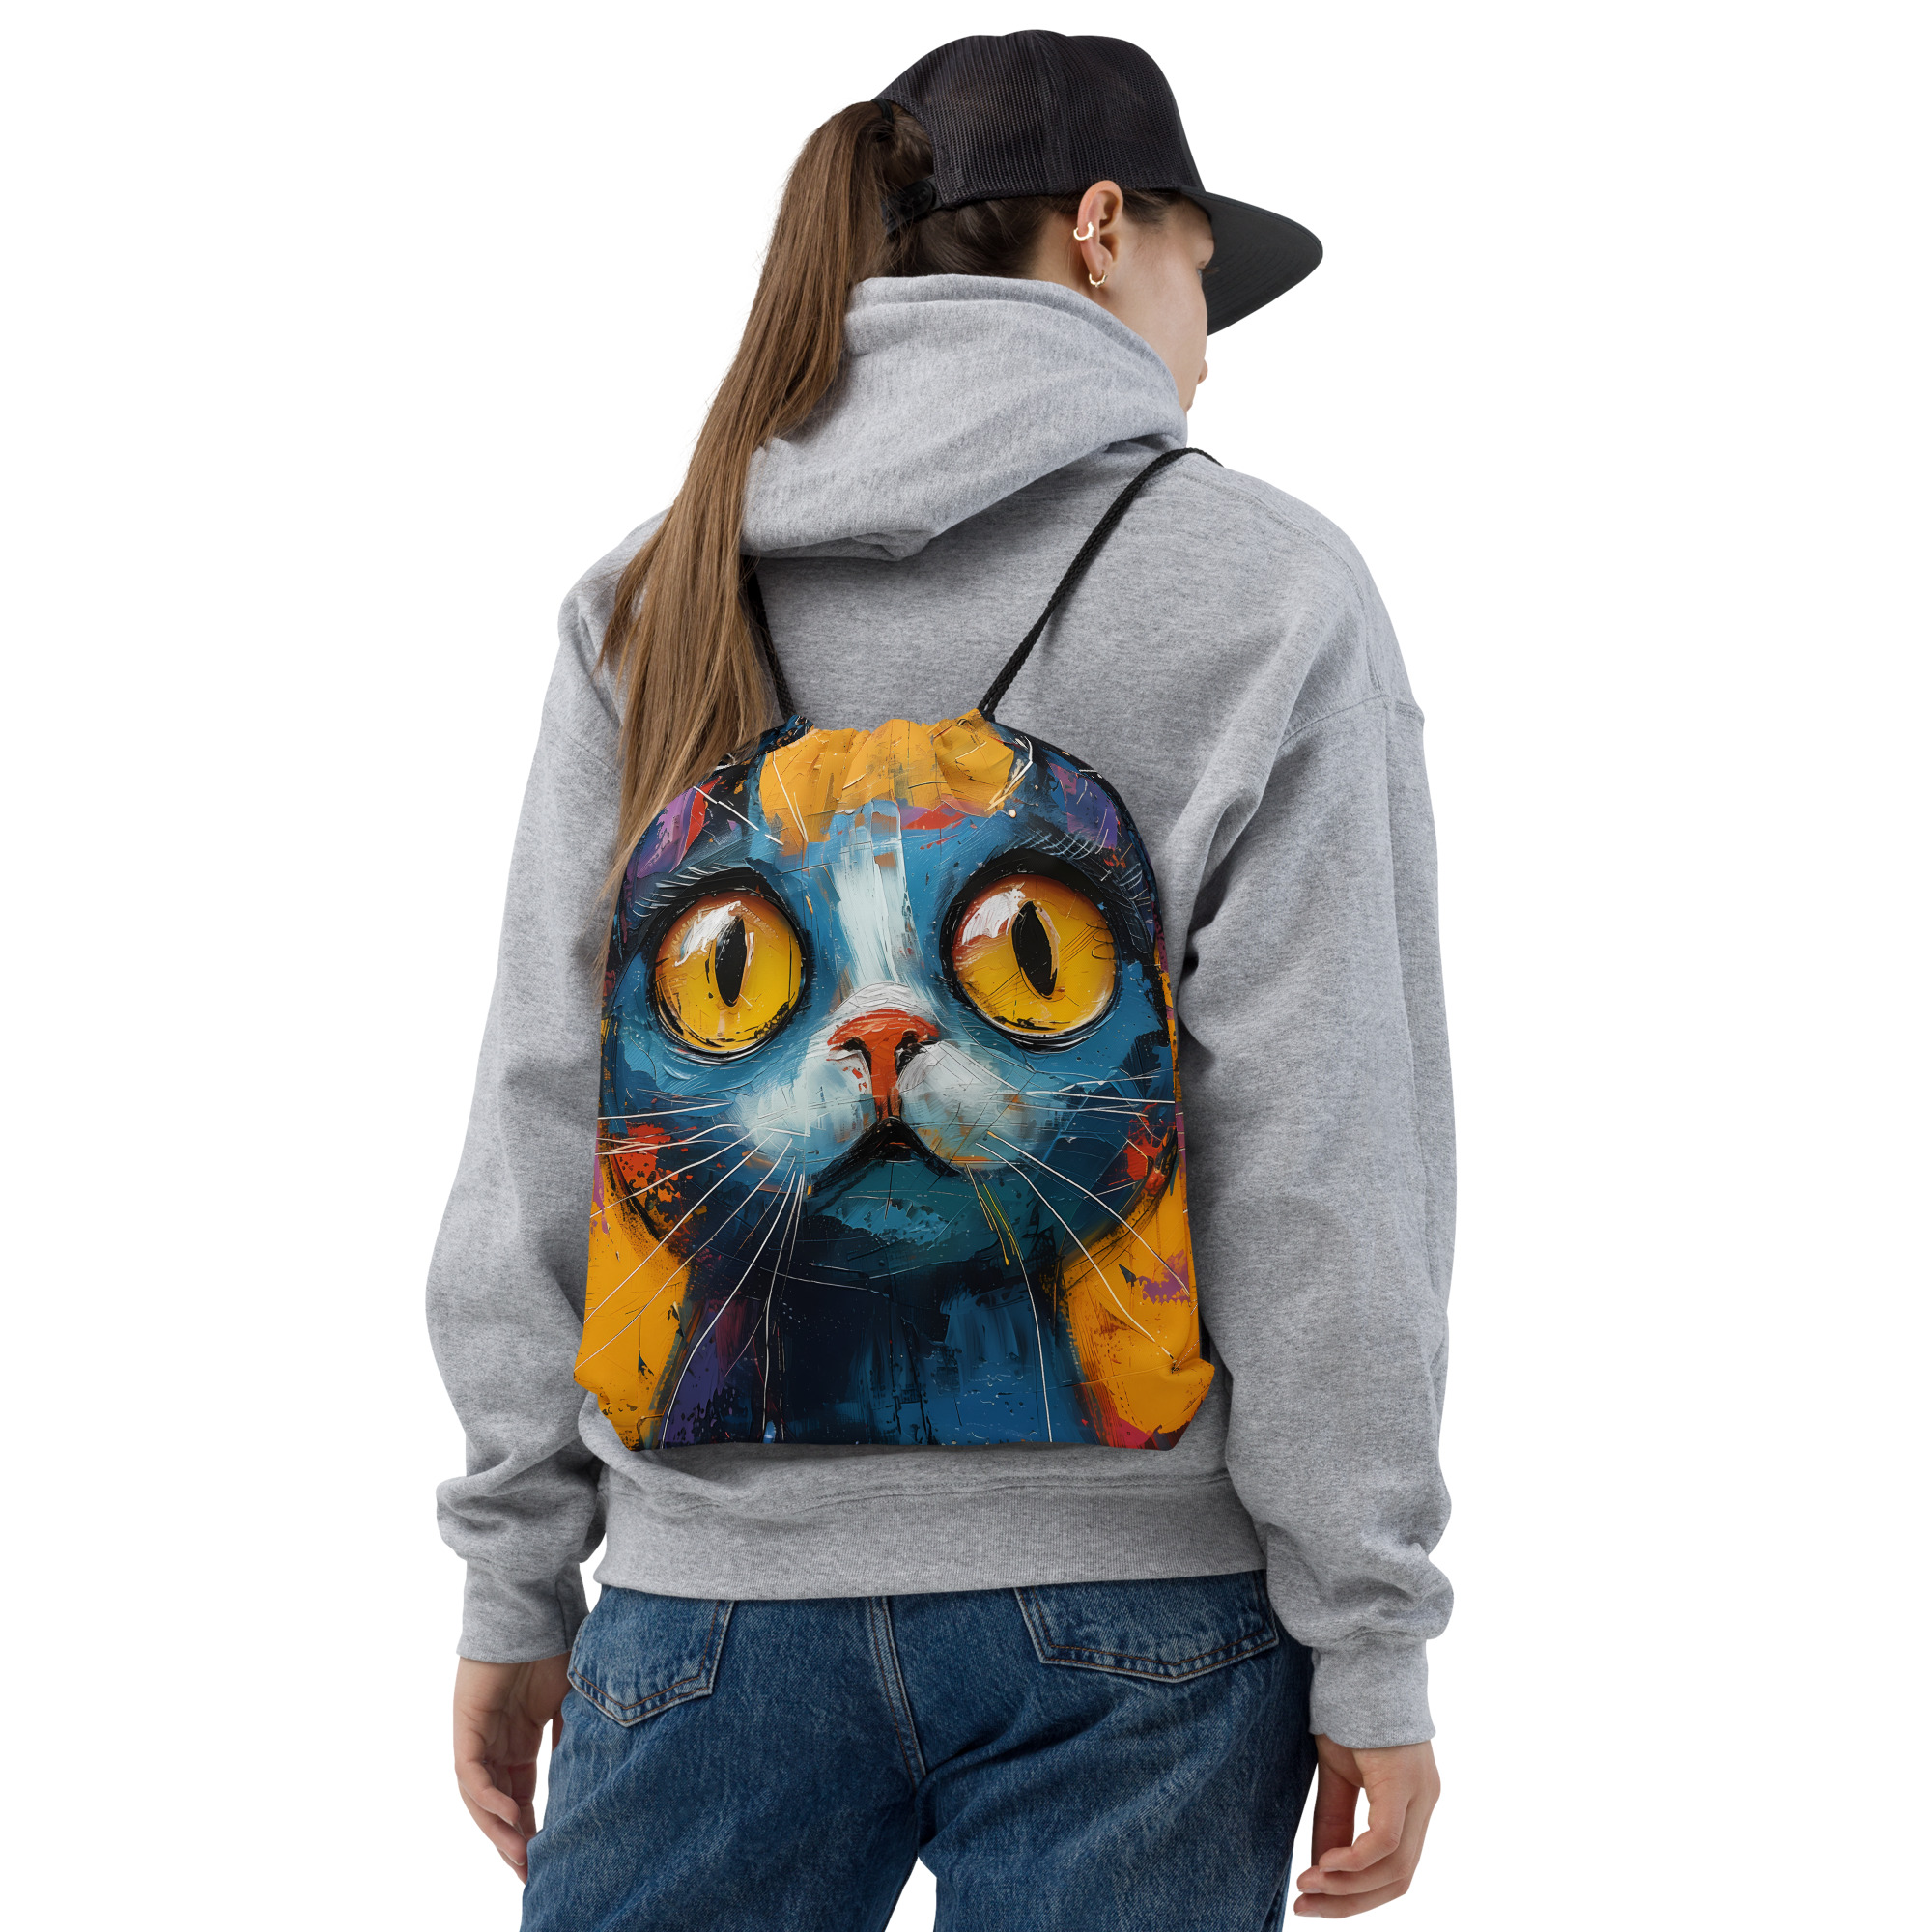 Curious Kitty - Drawstring bag - Out of the Fox